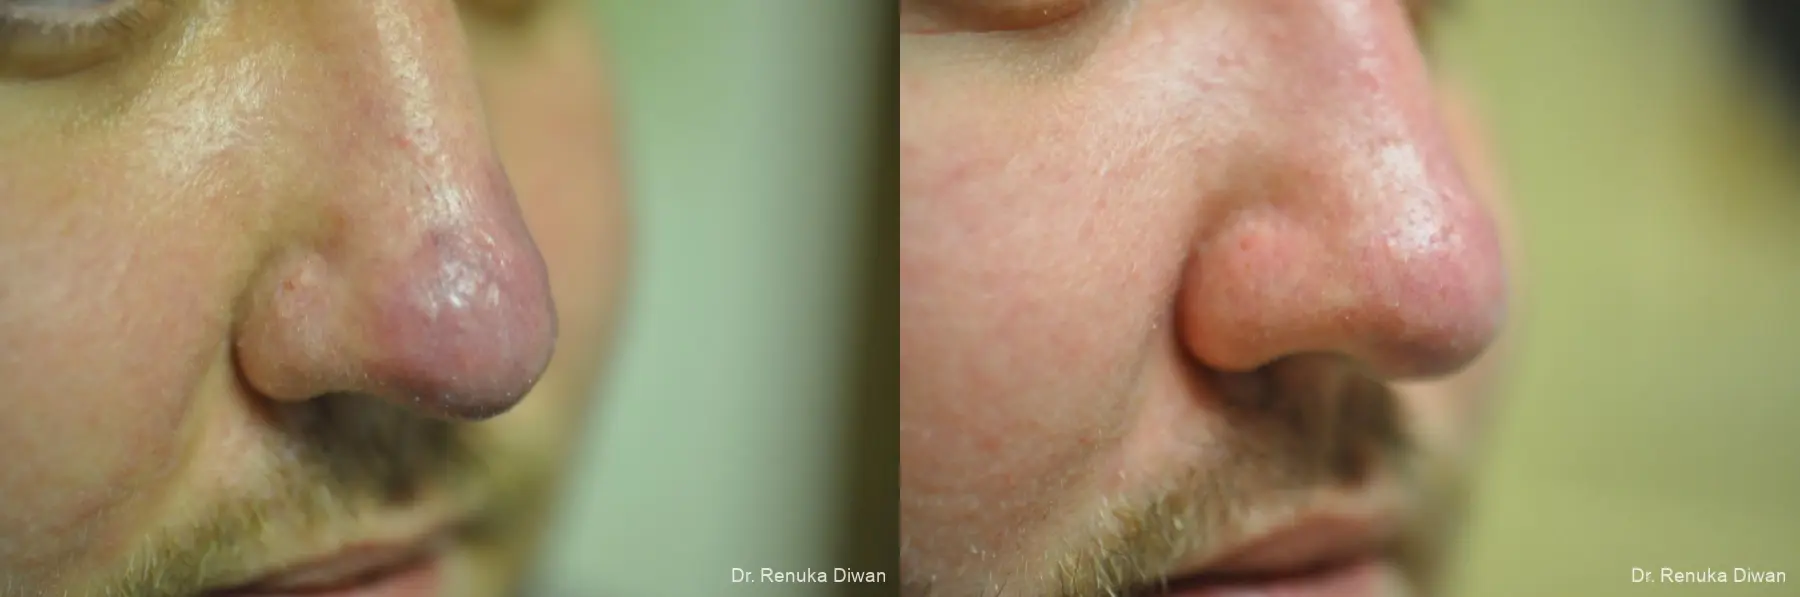 Laser For Veins And Redness For Men: Patient 9 - Before and After 1